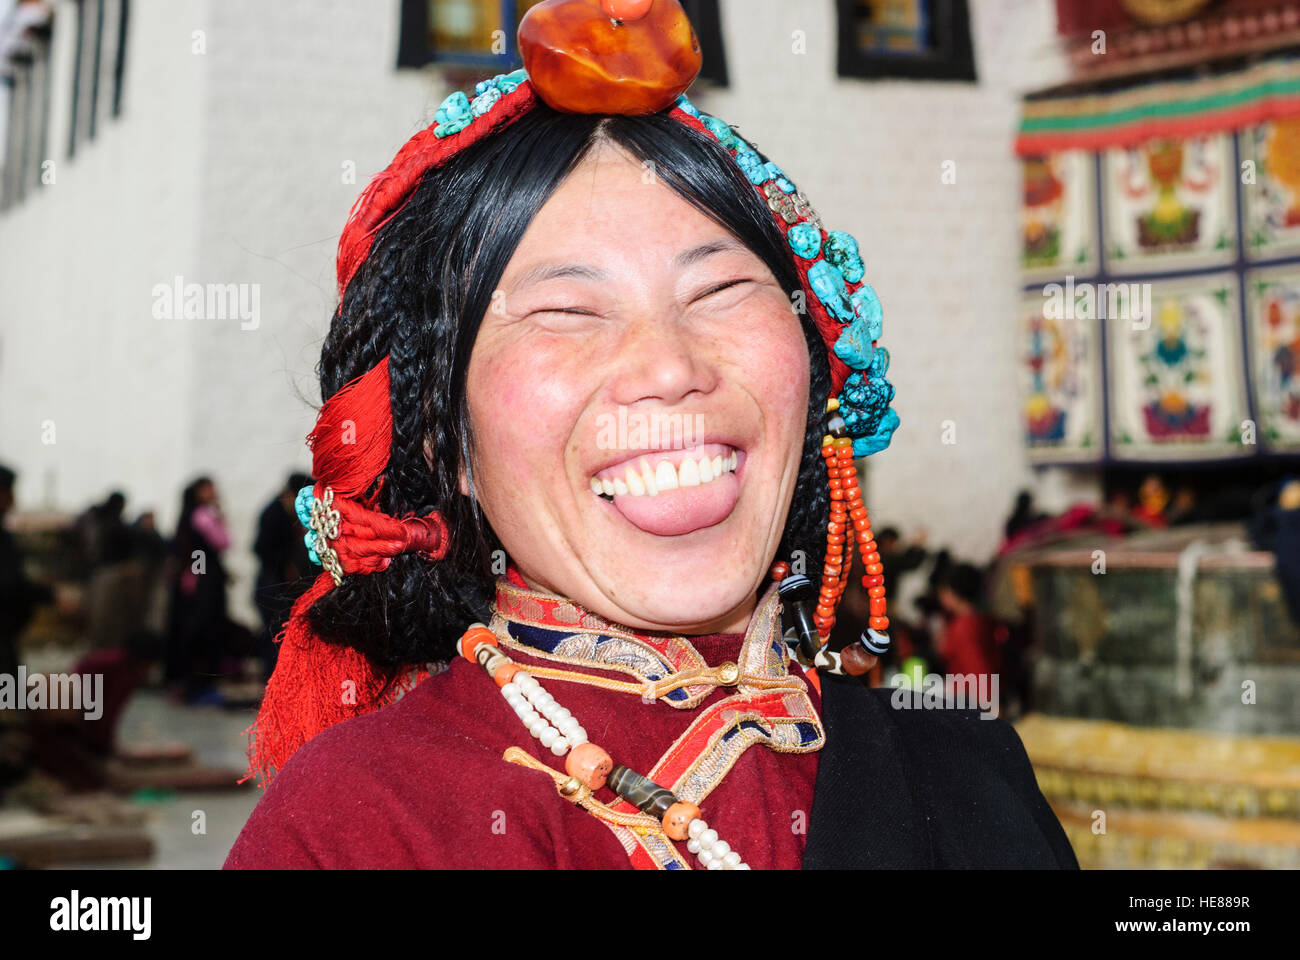 Lhasa: Jokhang Temple; Tibetan woman, headdress of turquoise, coral, amber and pearls worn at festivals like the Tibetan New Year (Losar), sticking ou Stock Photo